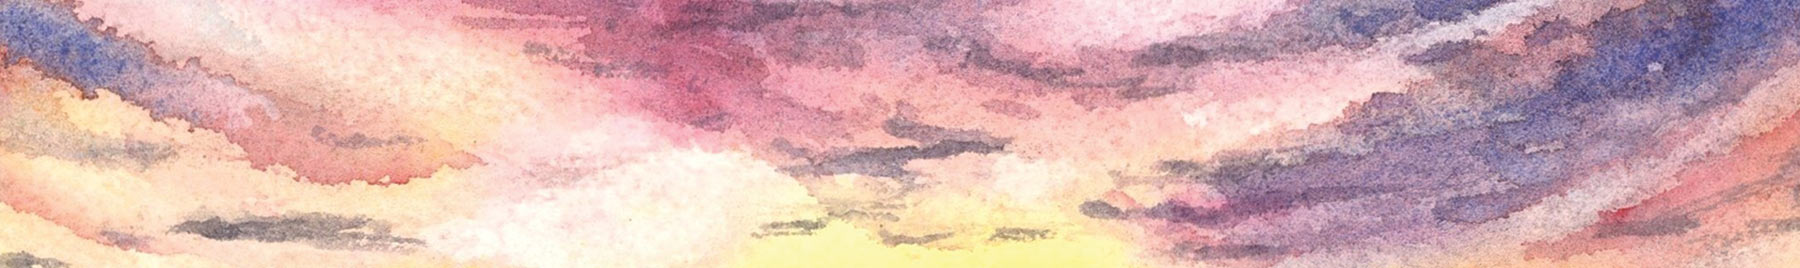 a watercolor painting of pink clouds